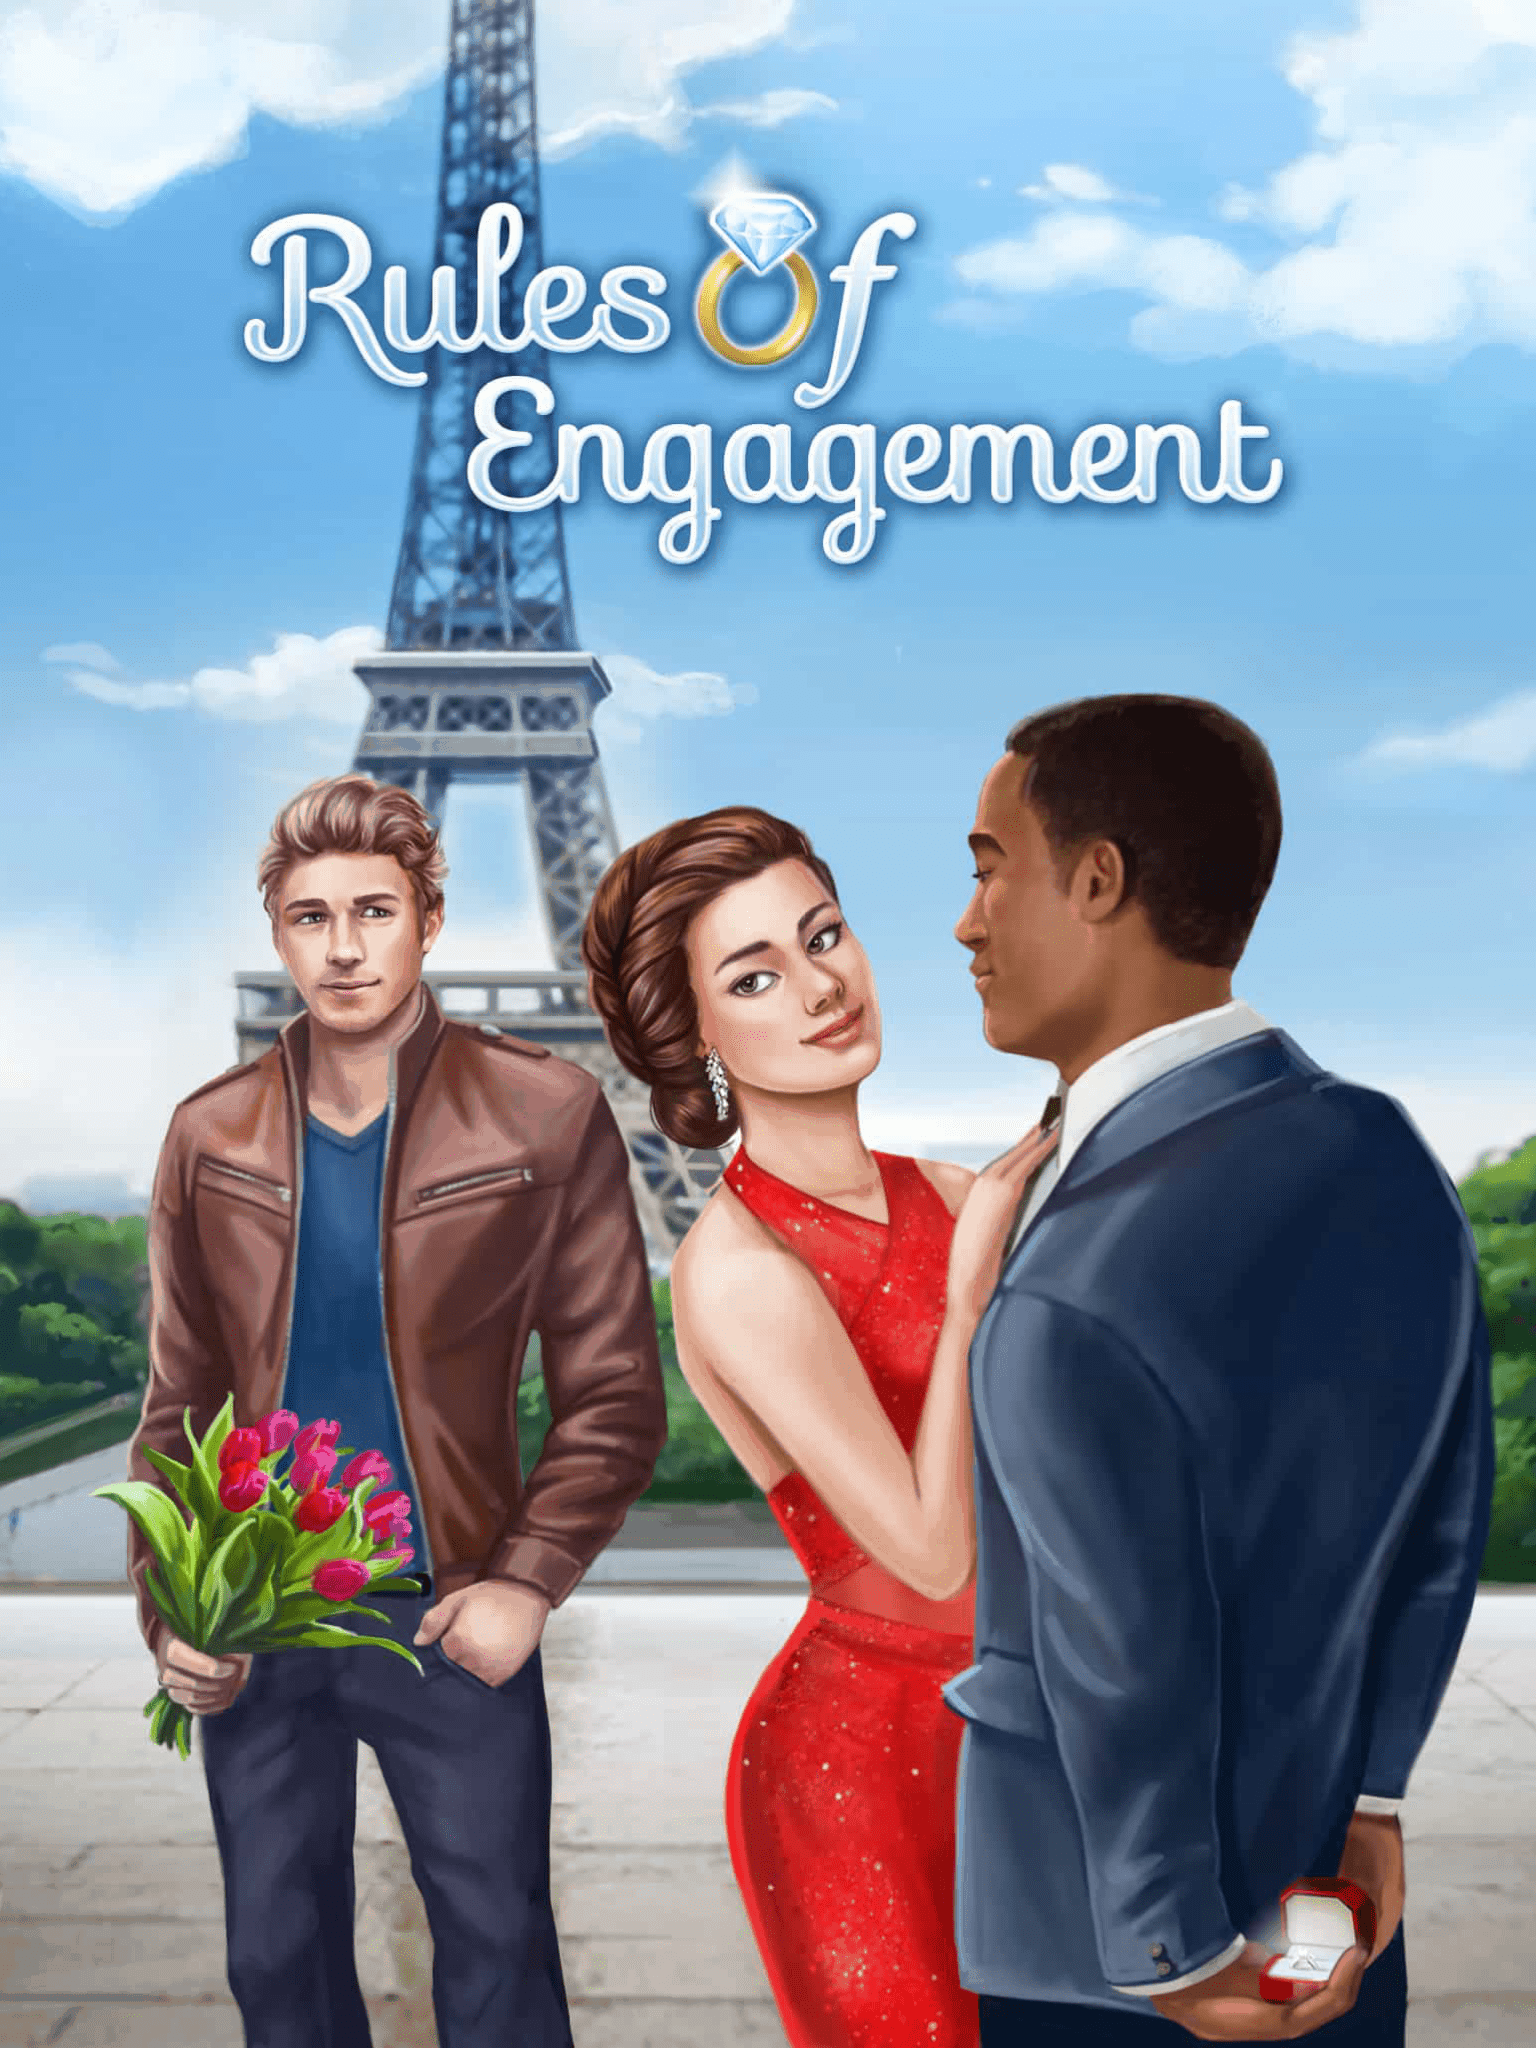 rules-of-engagement-book-1-choices-stories-you-play-wikia-fandom-powered-by-wikia